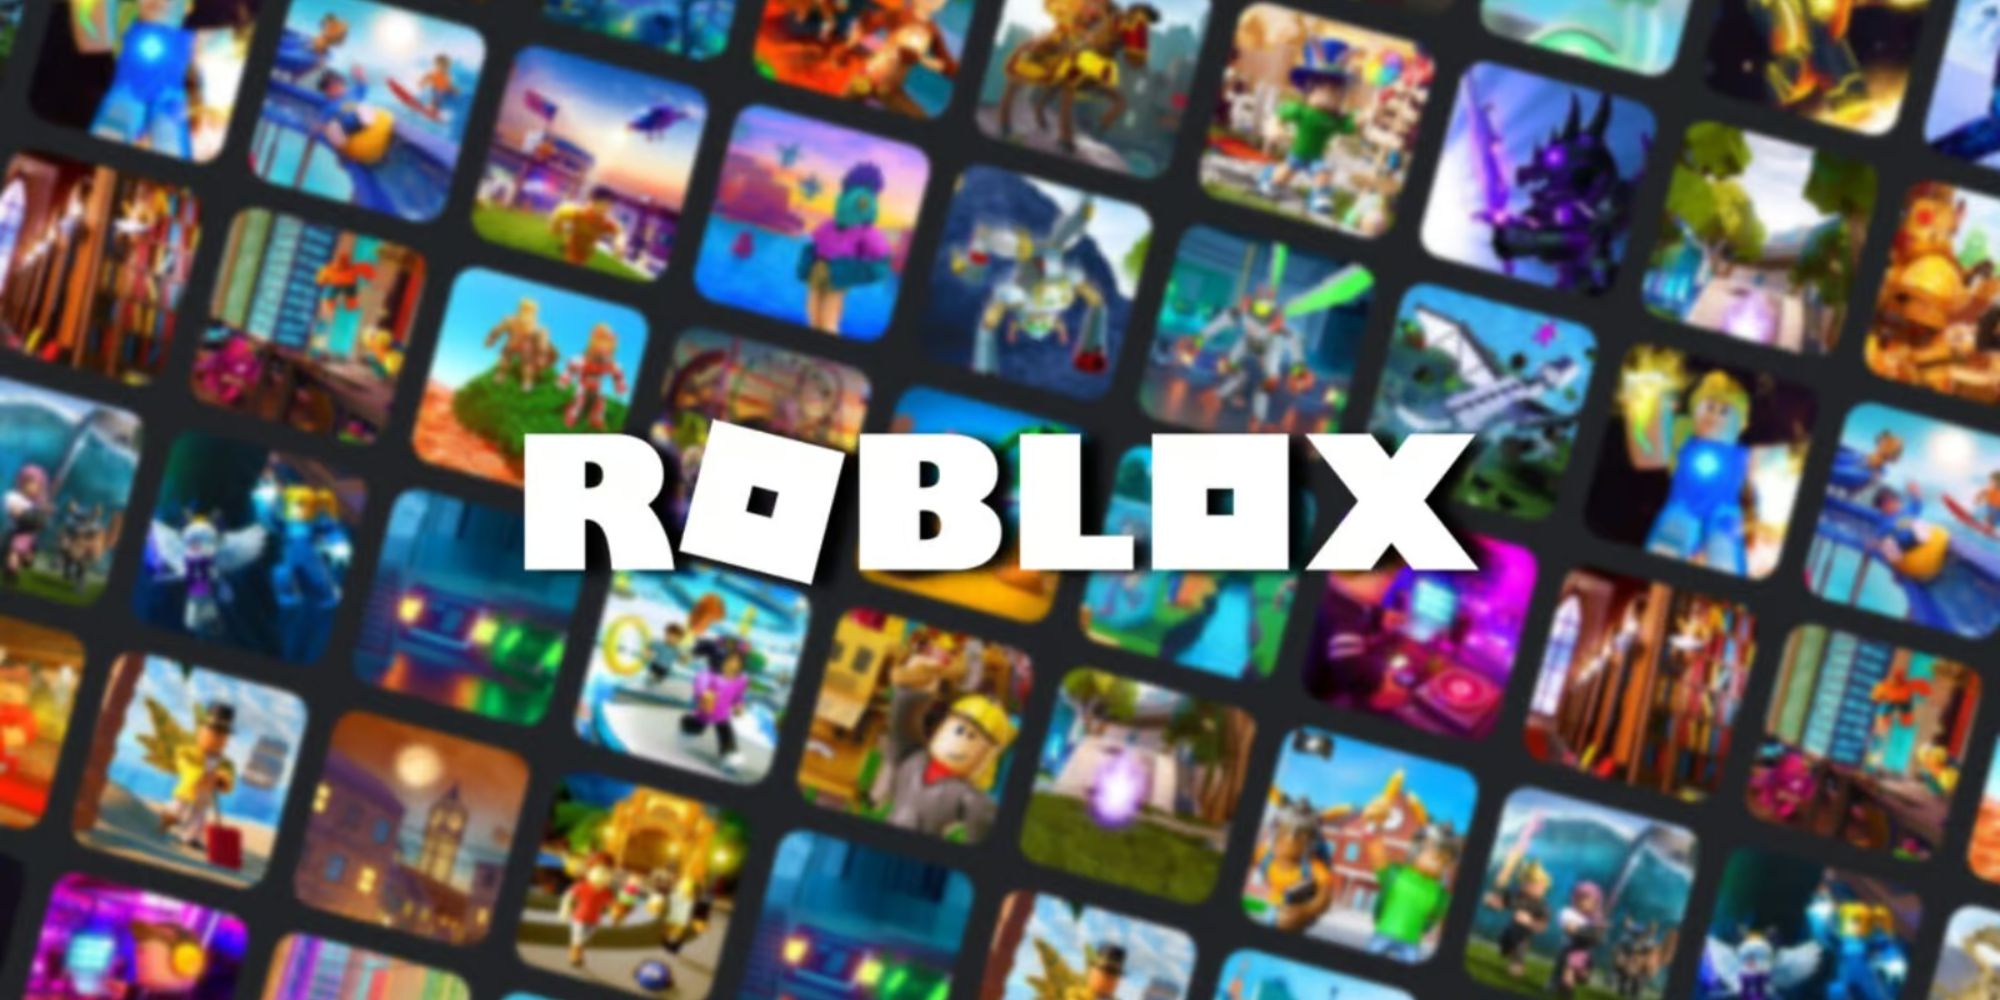 Roblox to Employees: Return to Office or Take Severance